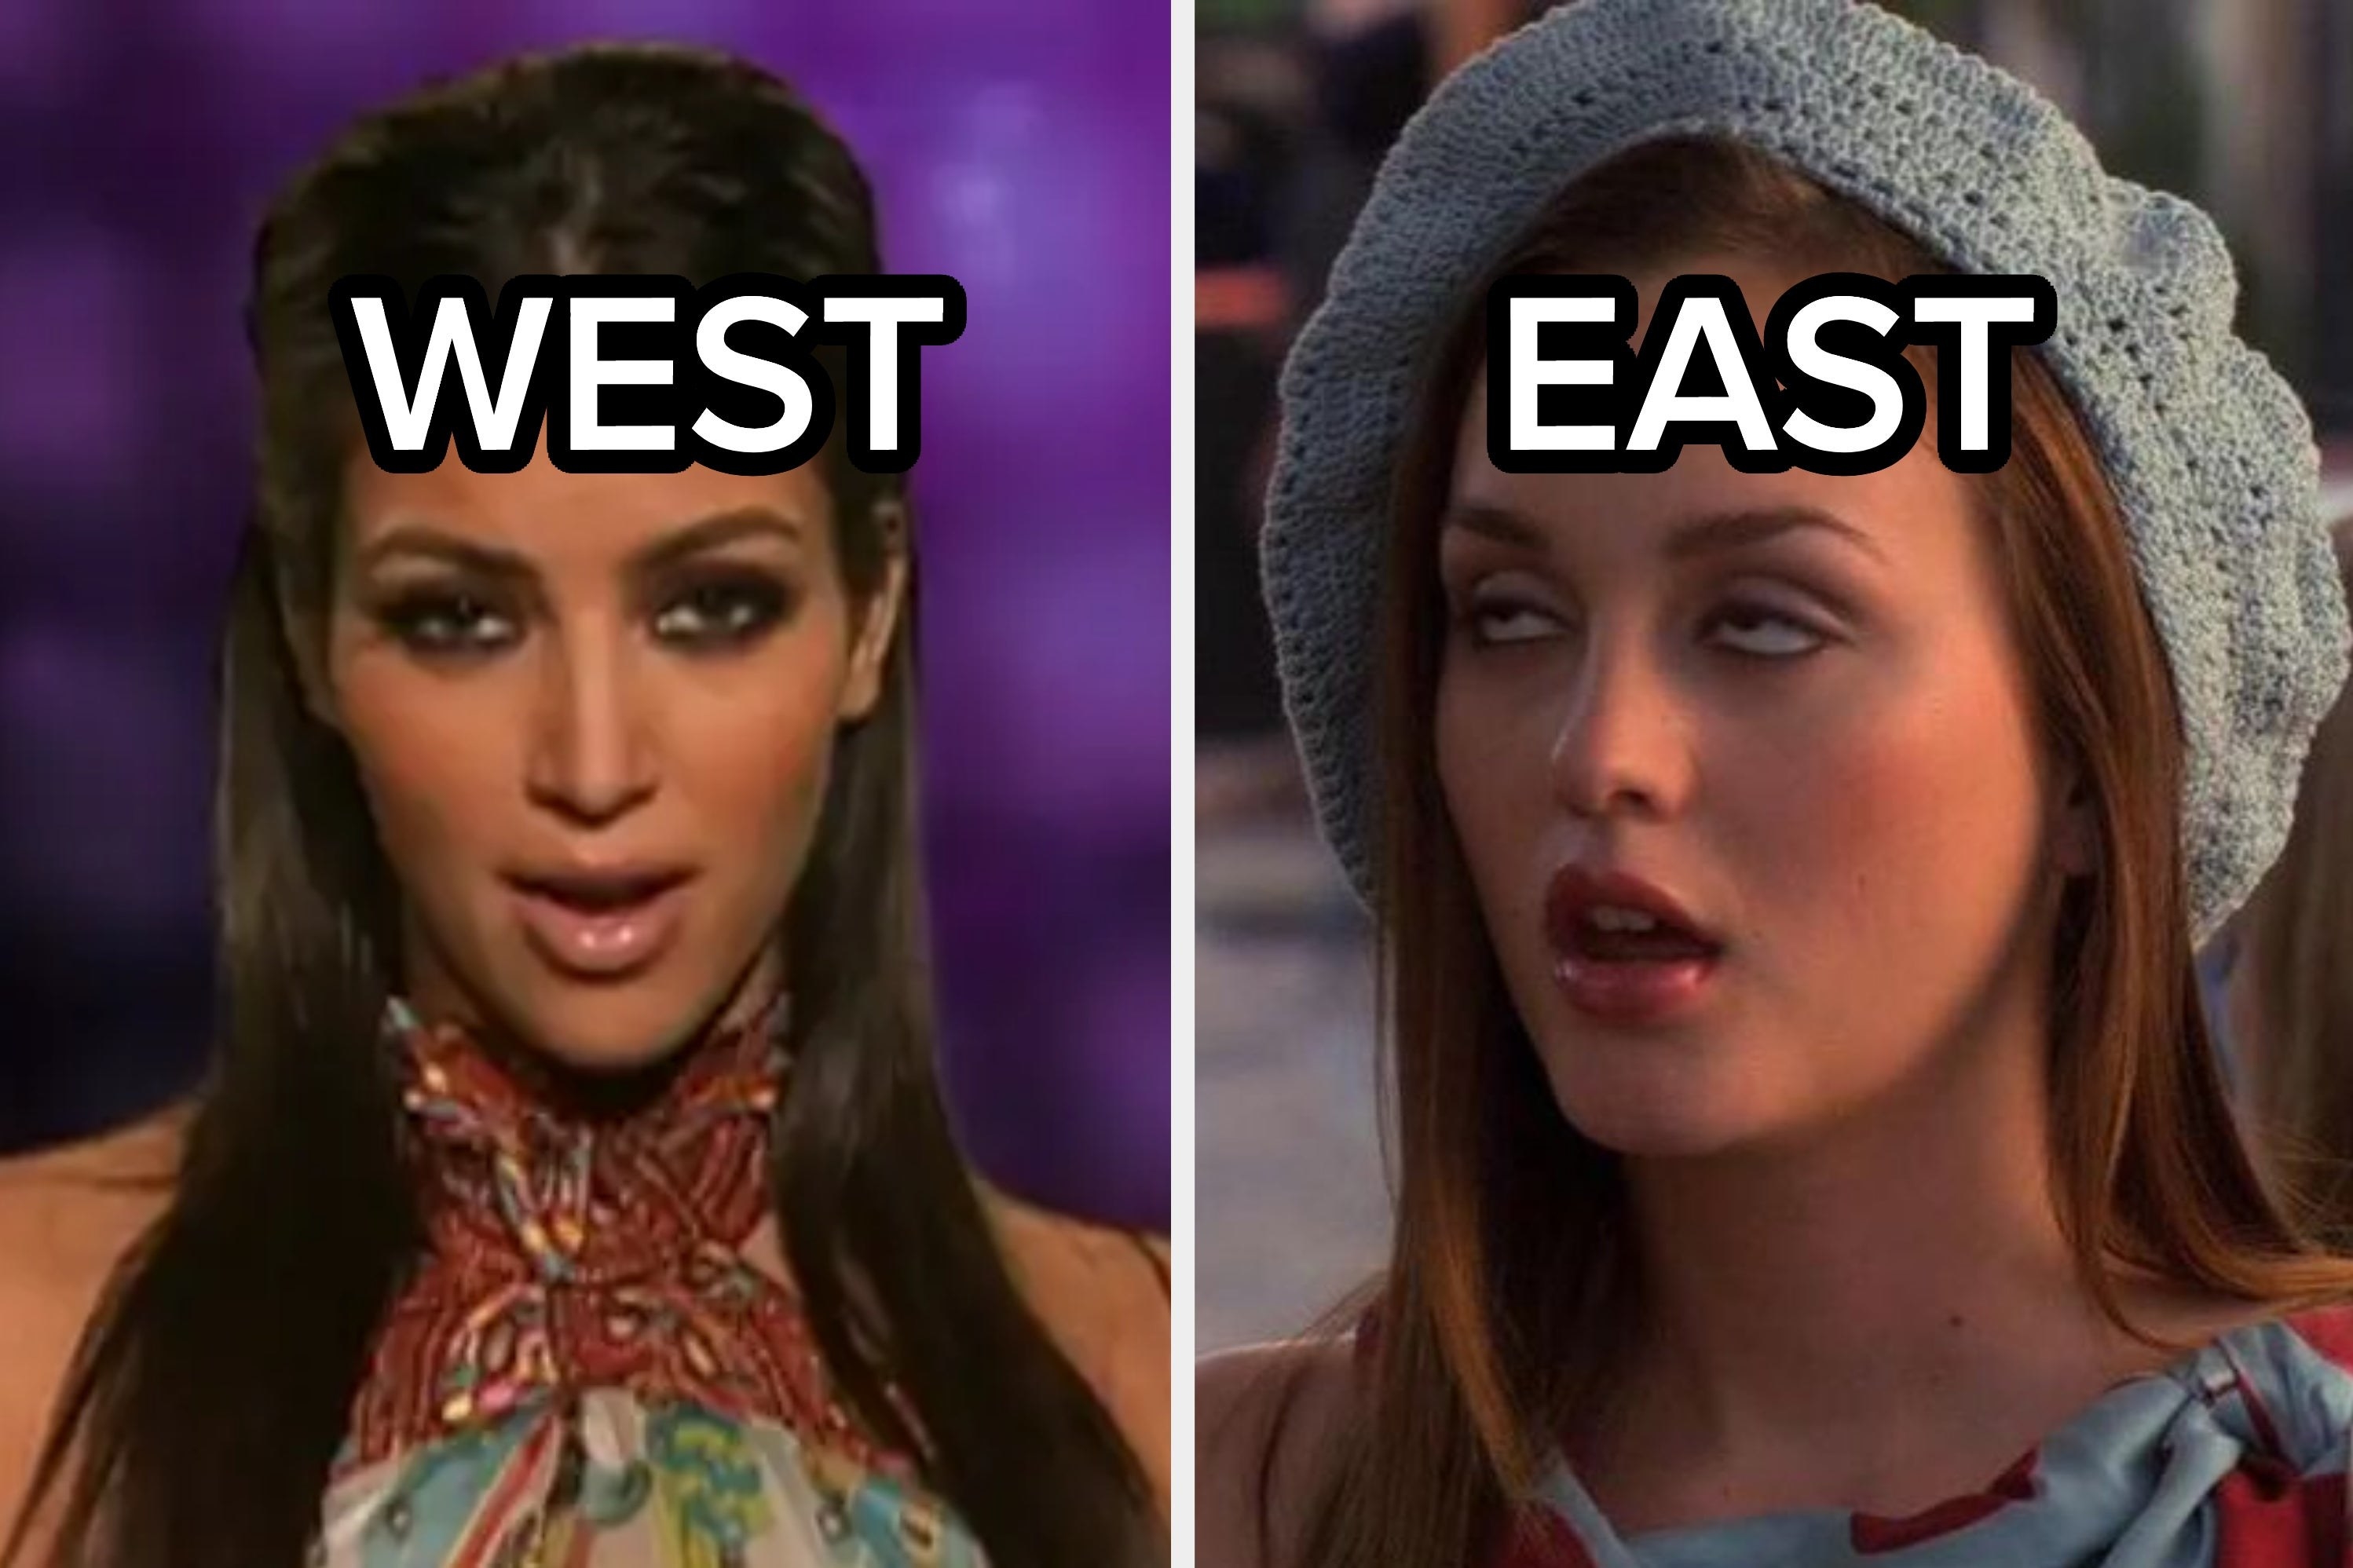 On the left, Kim Kardashian labeled West, and on the right, Blair form Gossip Girl labeled East